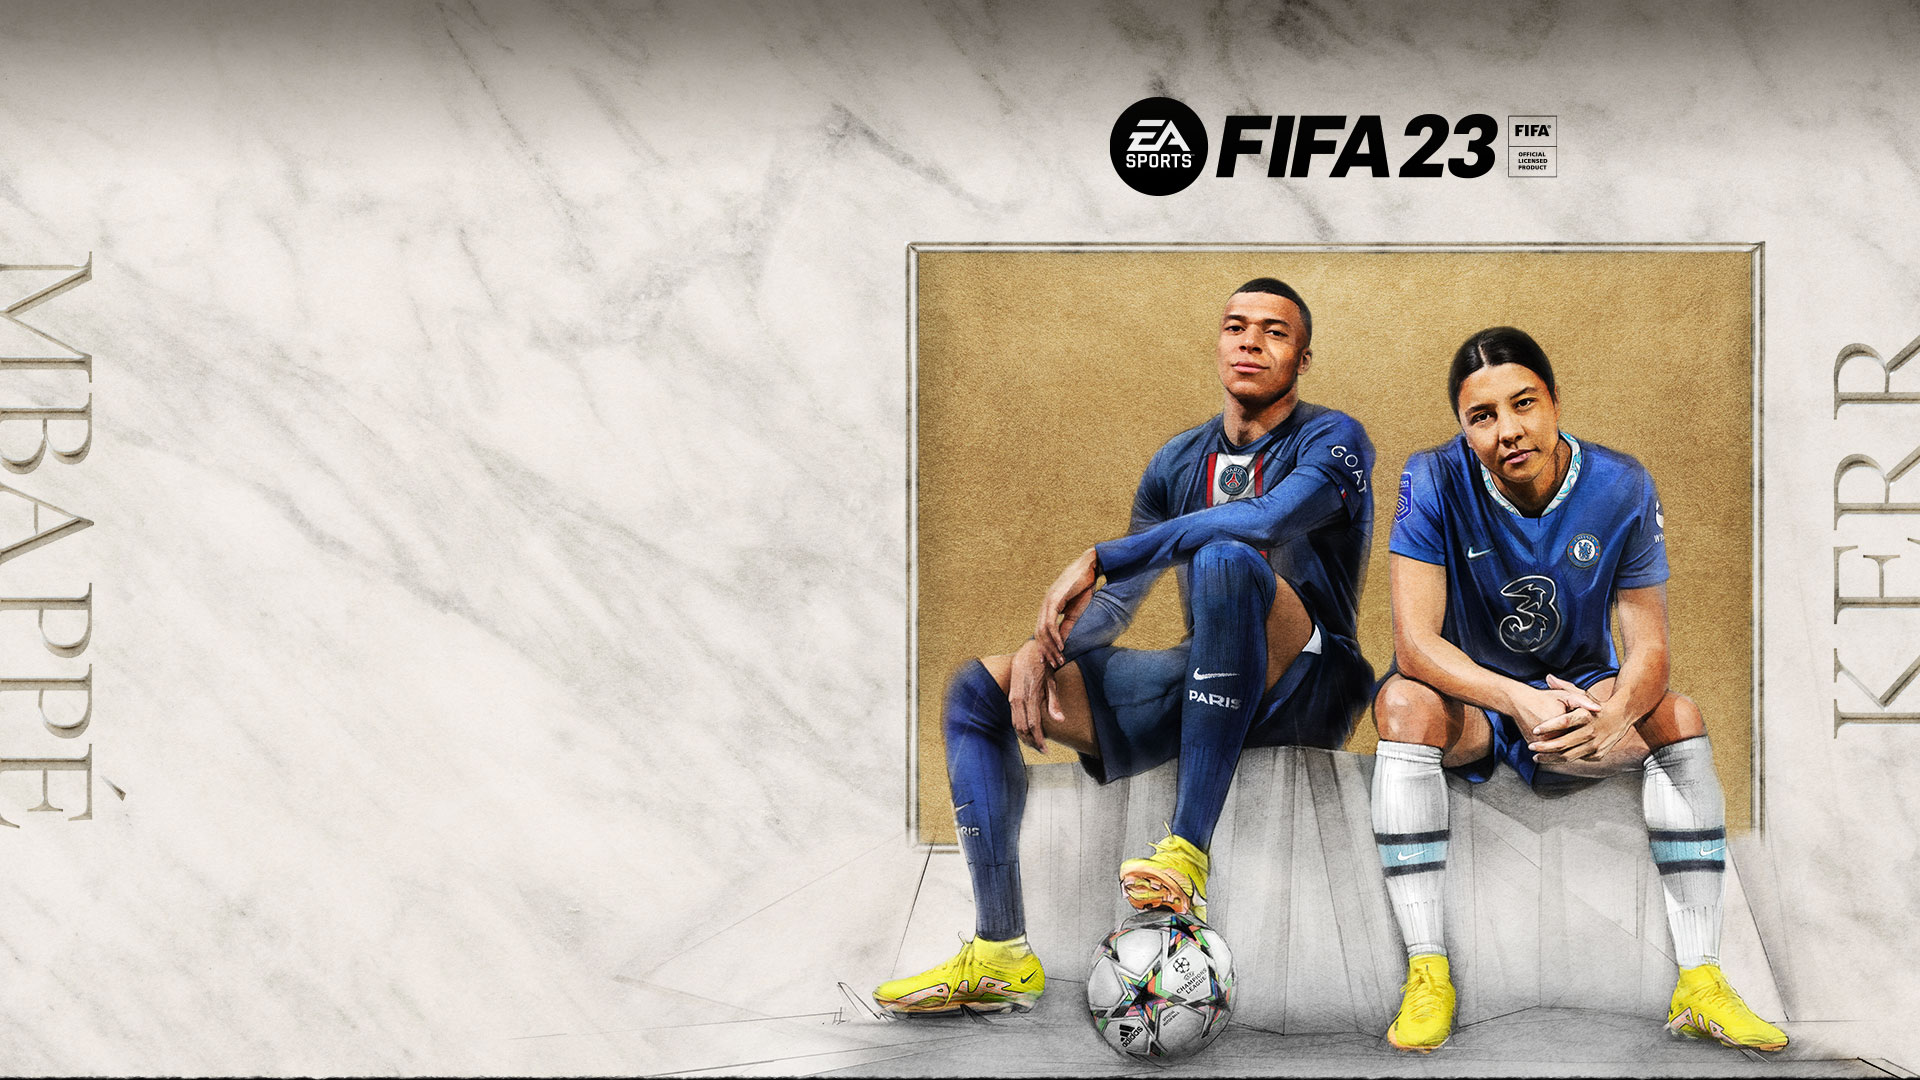 EA SPORTS FIFA 23, FIFA Official Licensed Product, Mbappe, Kerr, two players sit on a cloth covered bench in front of a corkboard.